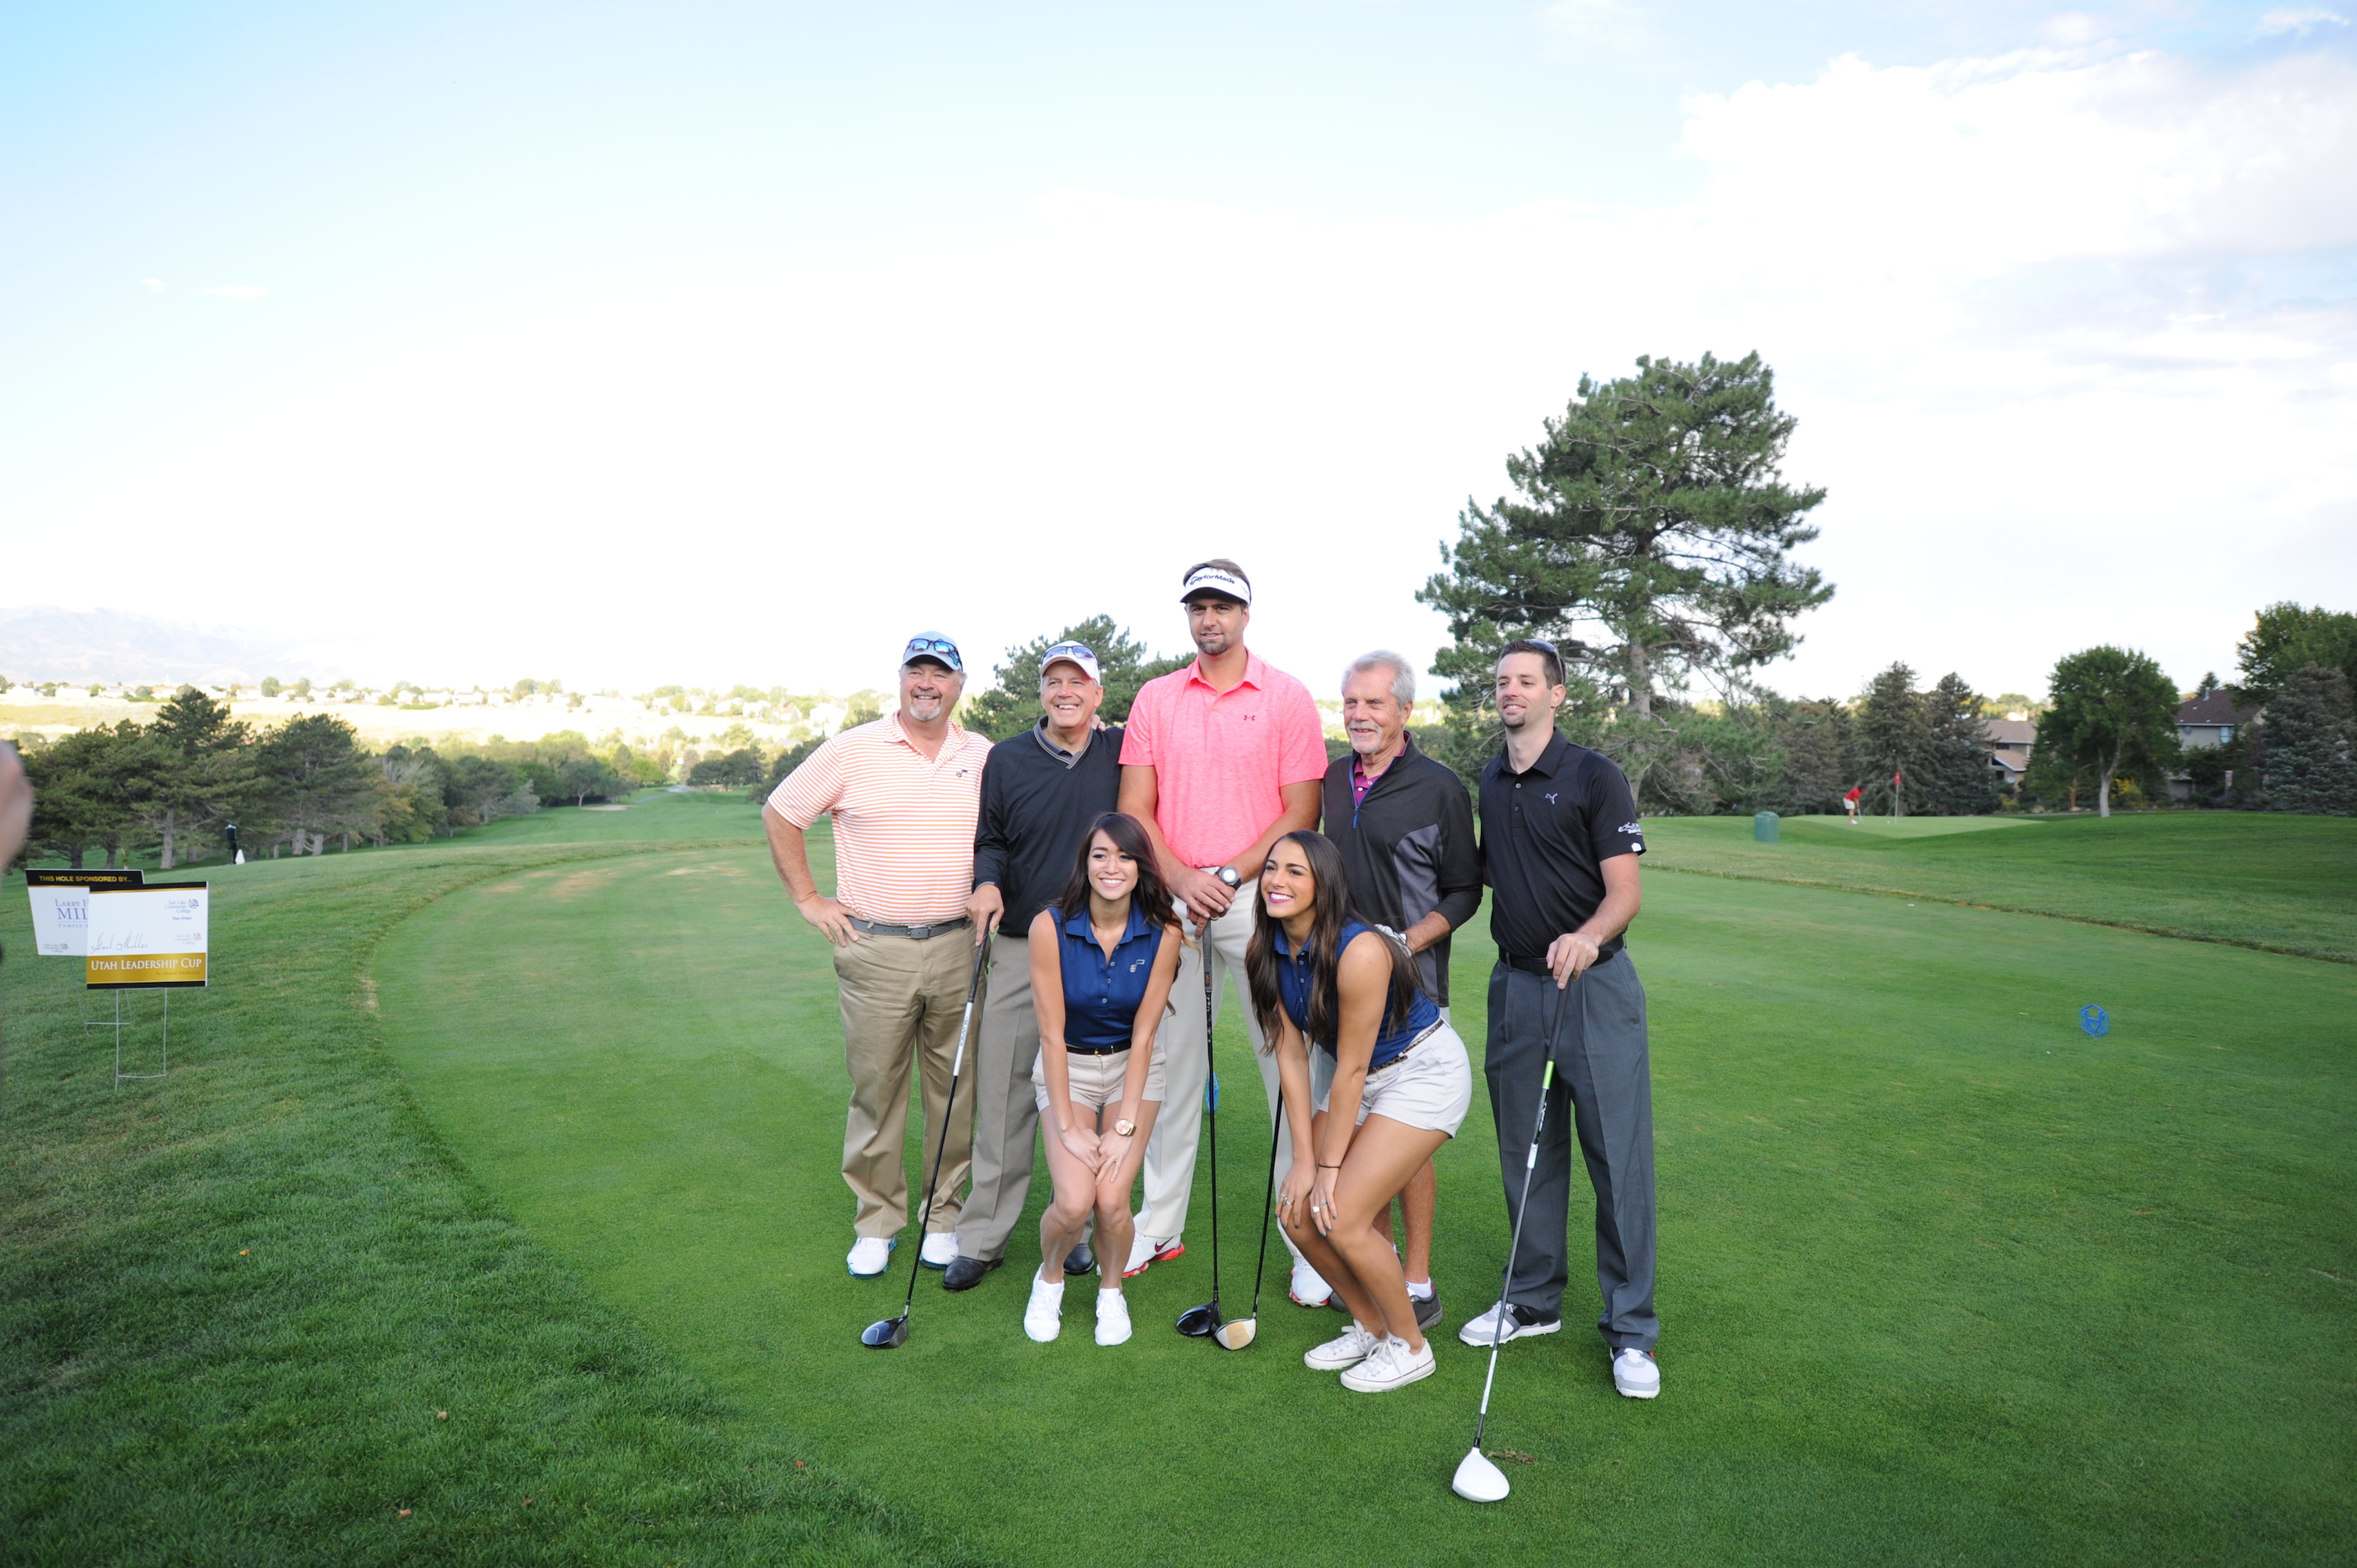 Former Utah Jazz player Mehmet Okur and two Utah Jazz Dancers pose on the first tee with a team of golfers.